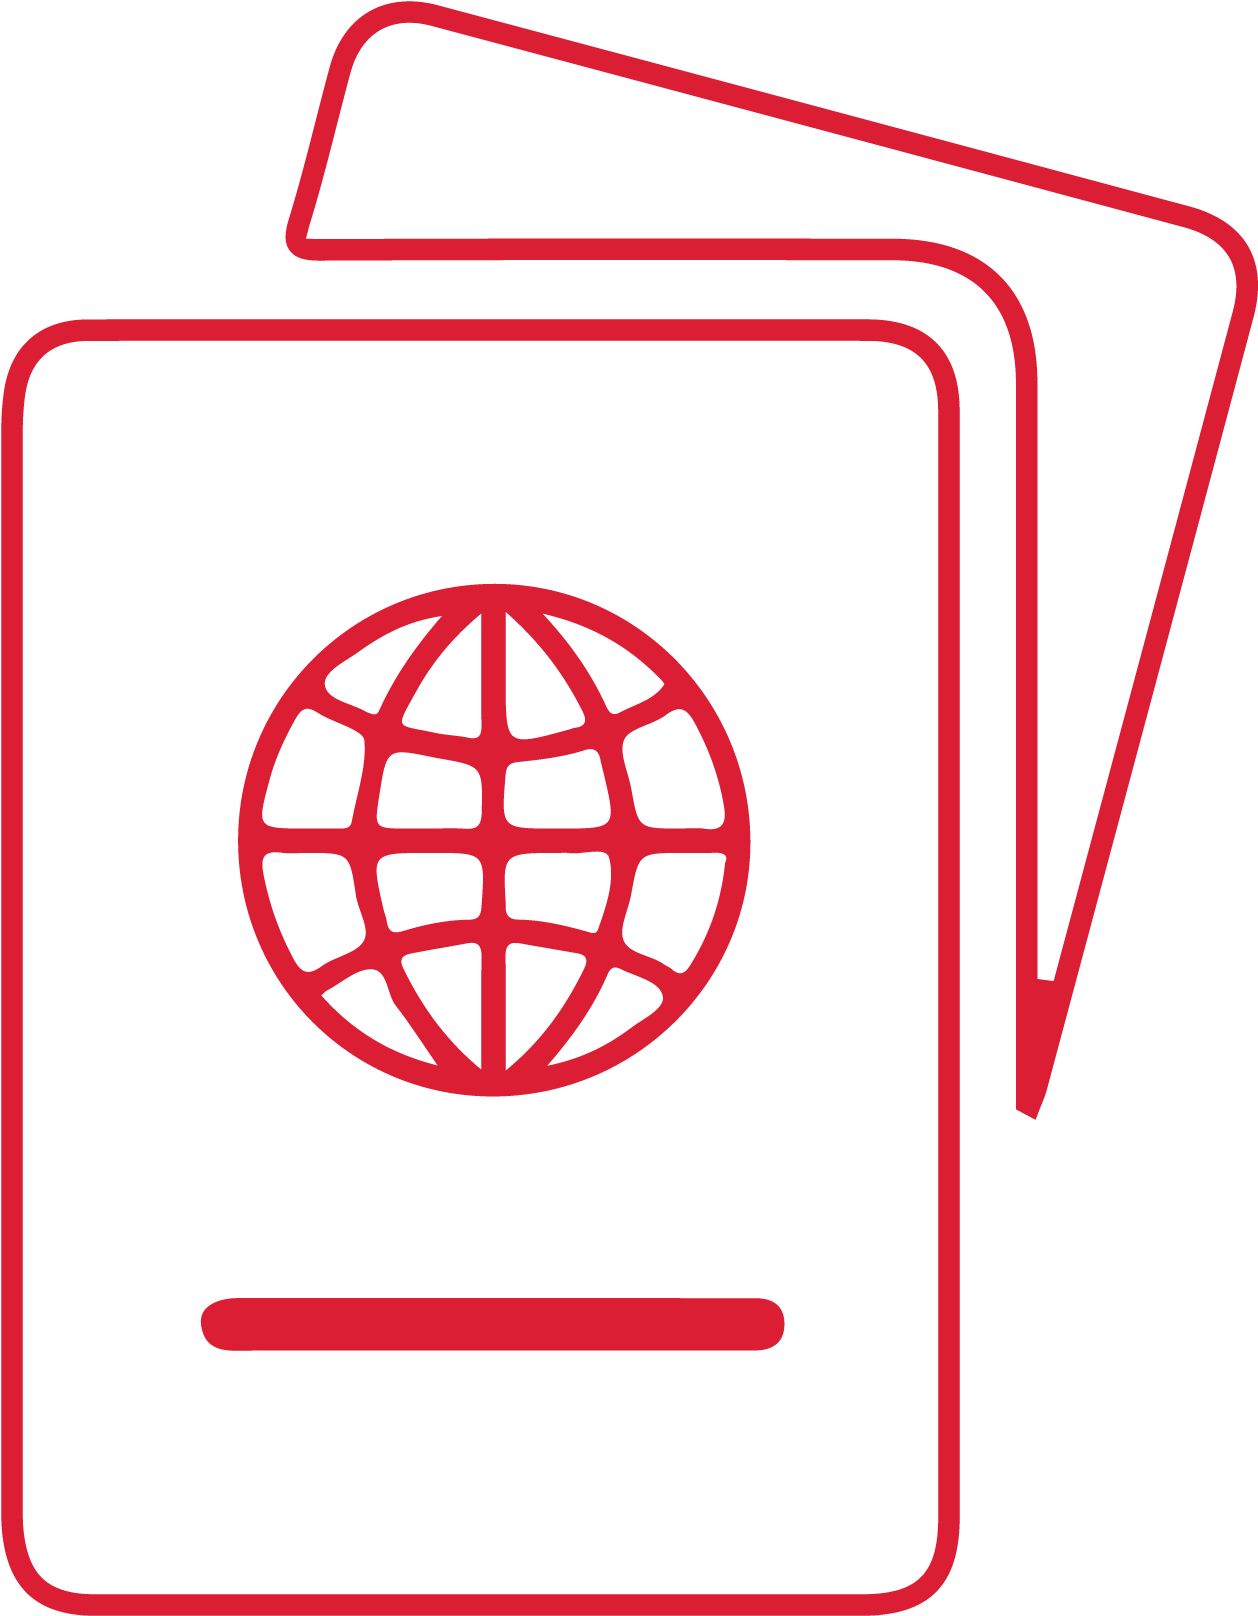 Immigration Smart Services - Globe Icon In Red (1274x1632)